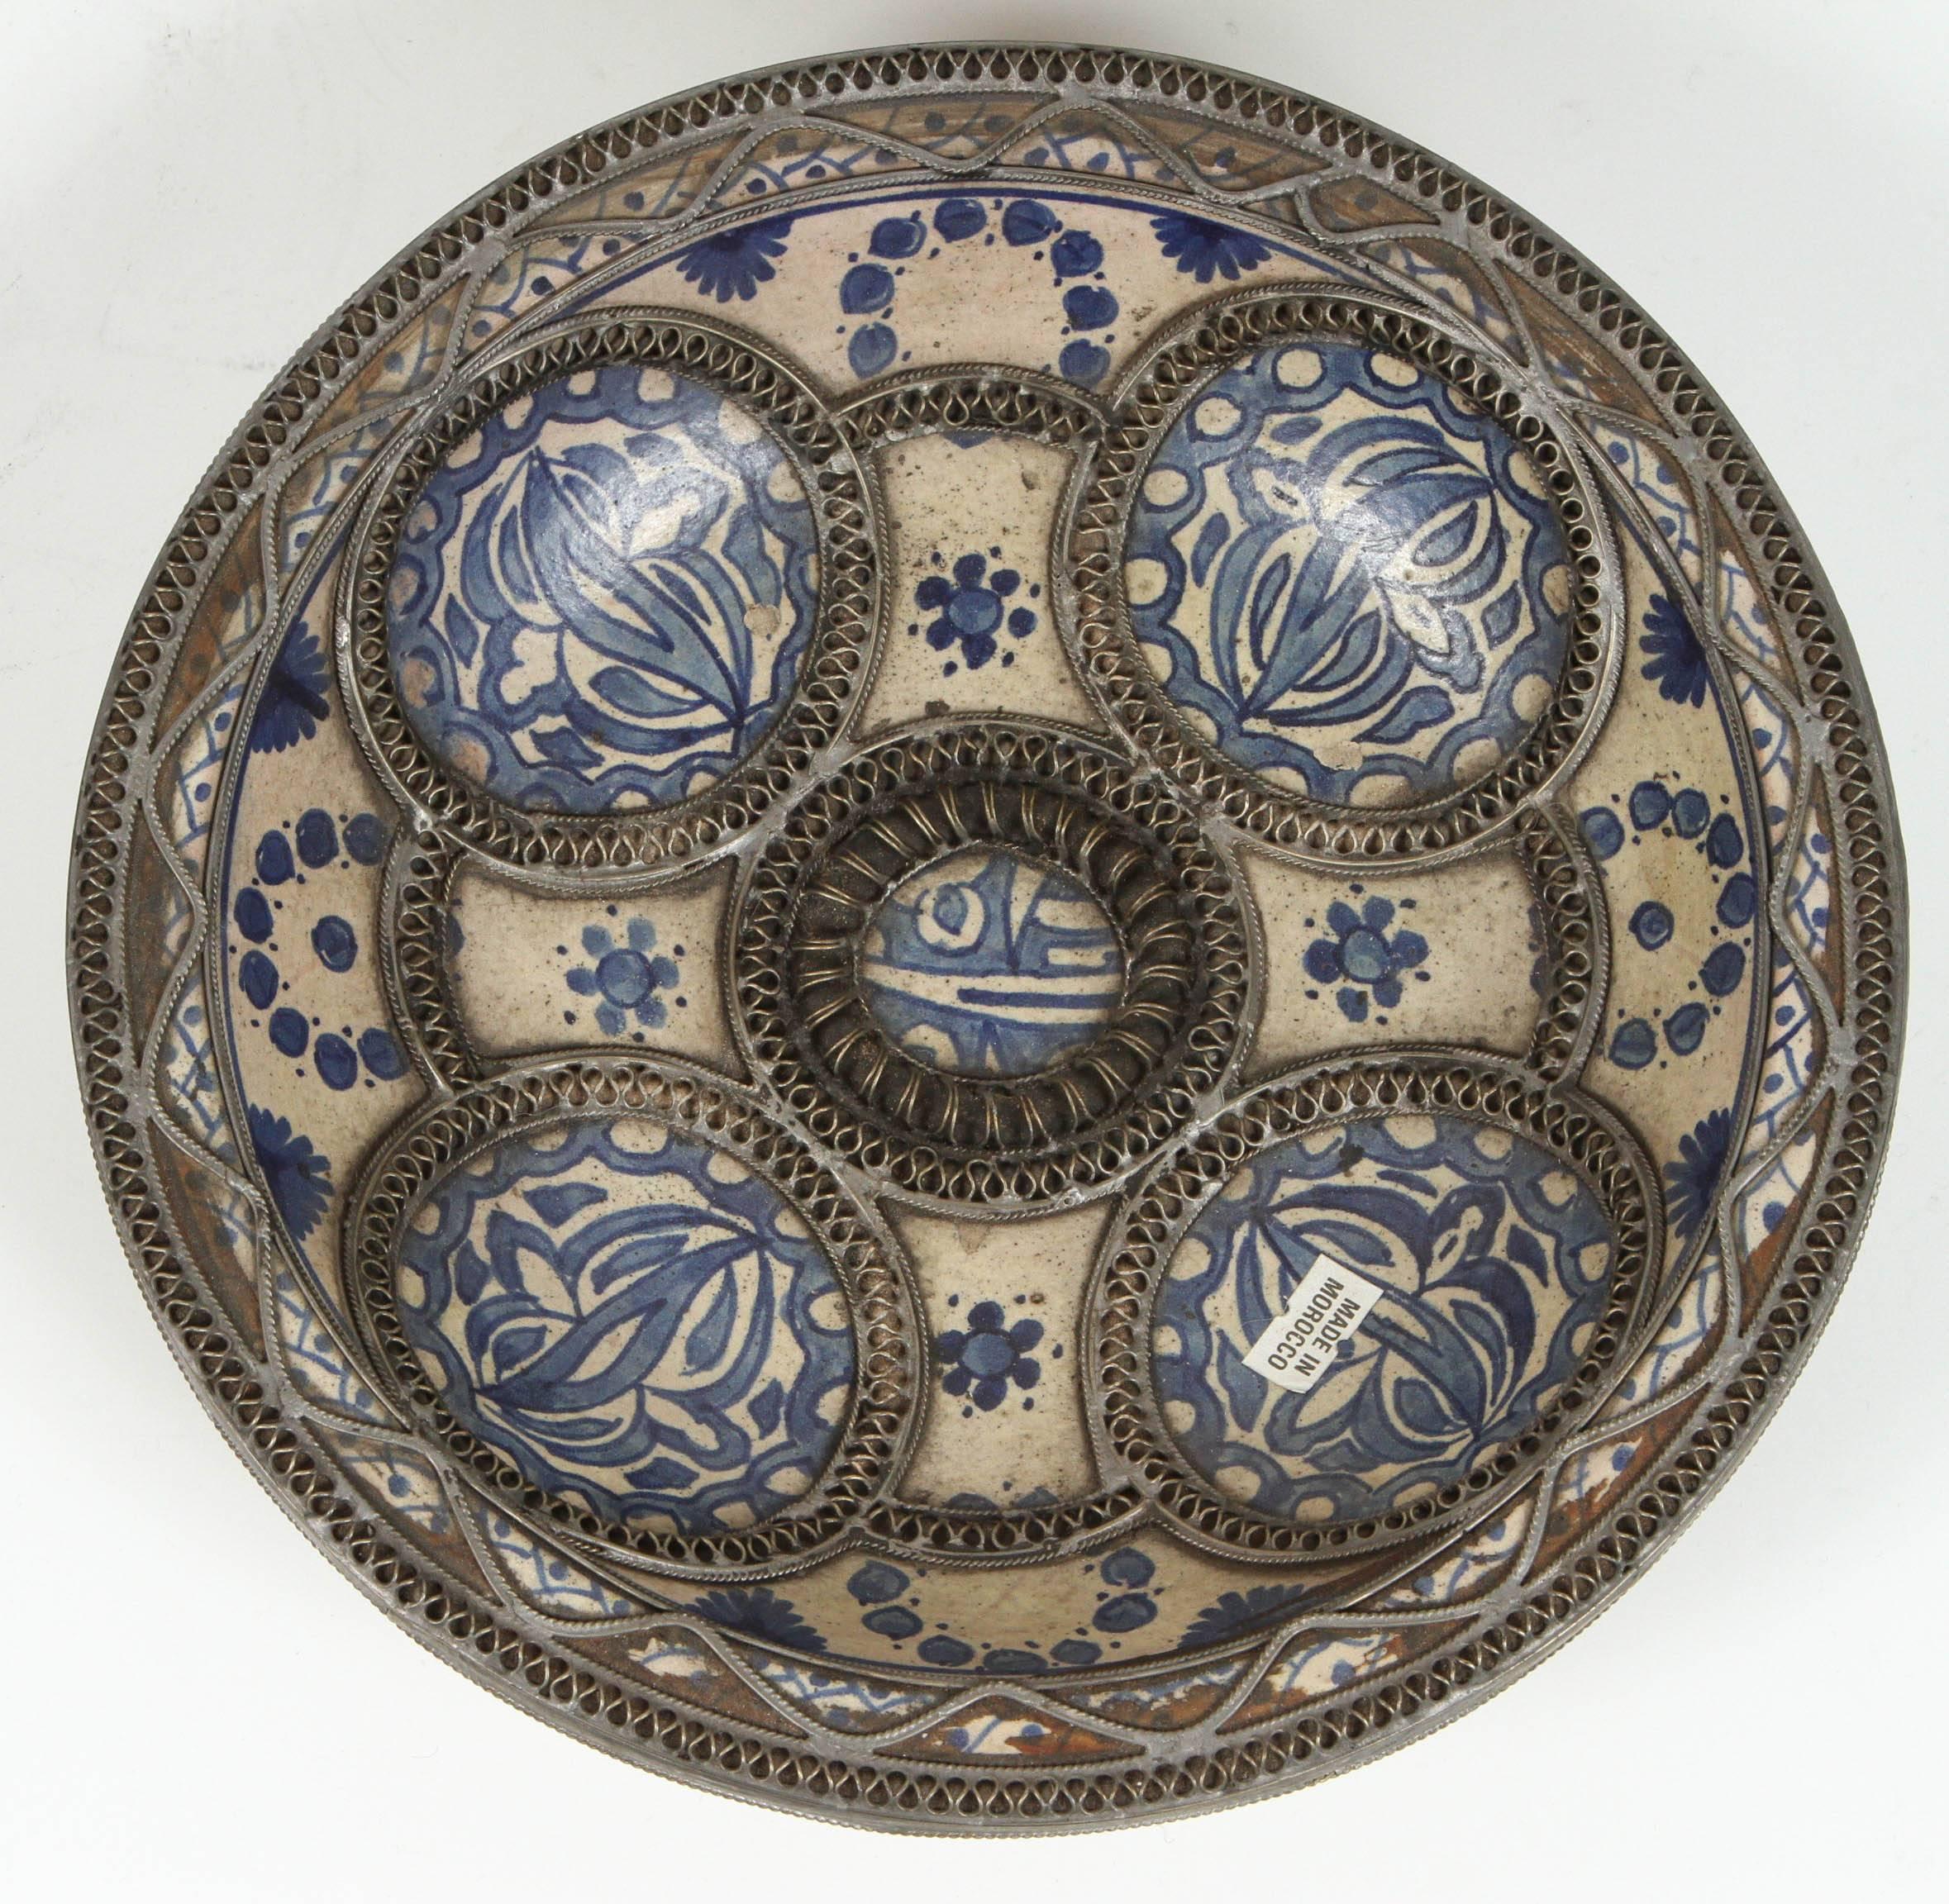 Moroccan Set of Four Ceramic Decorative Plates from Fez, Morocco